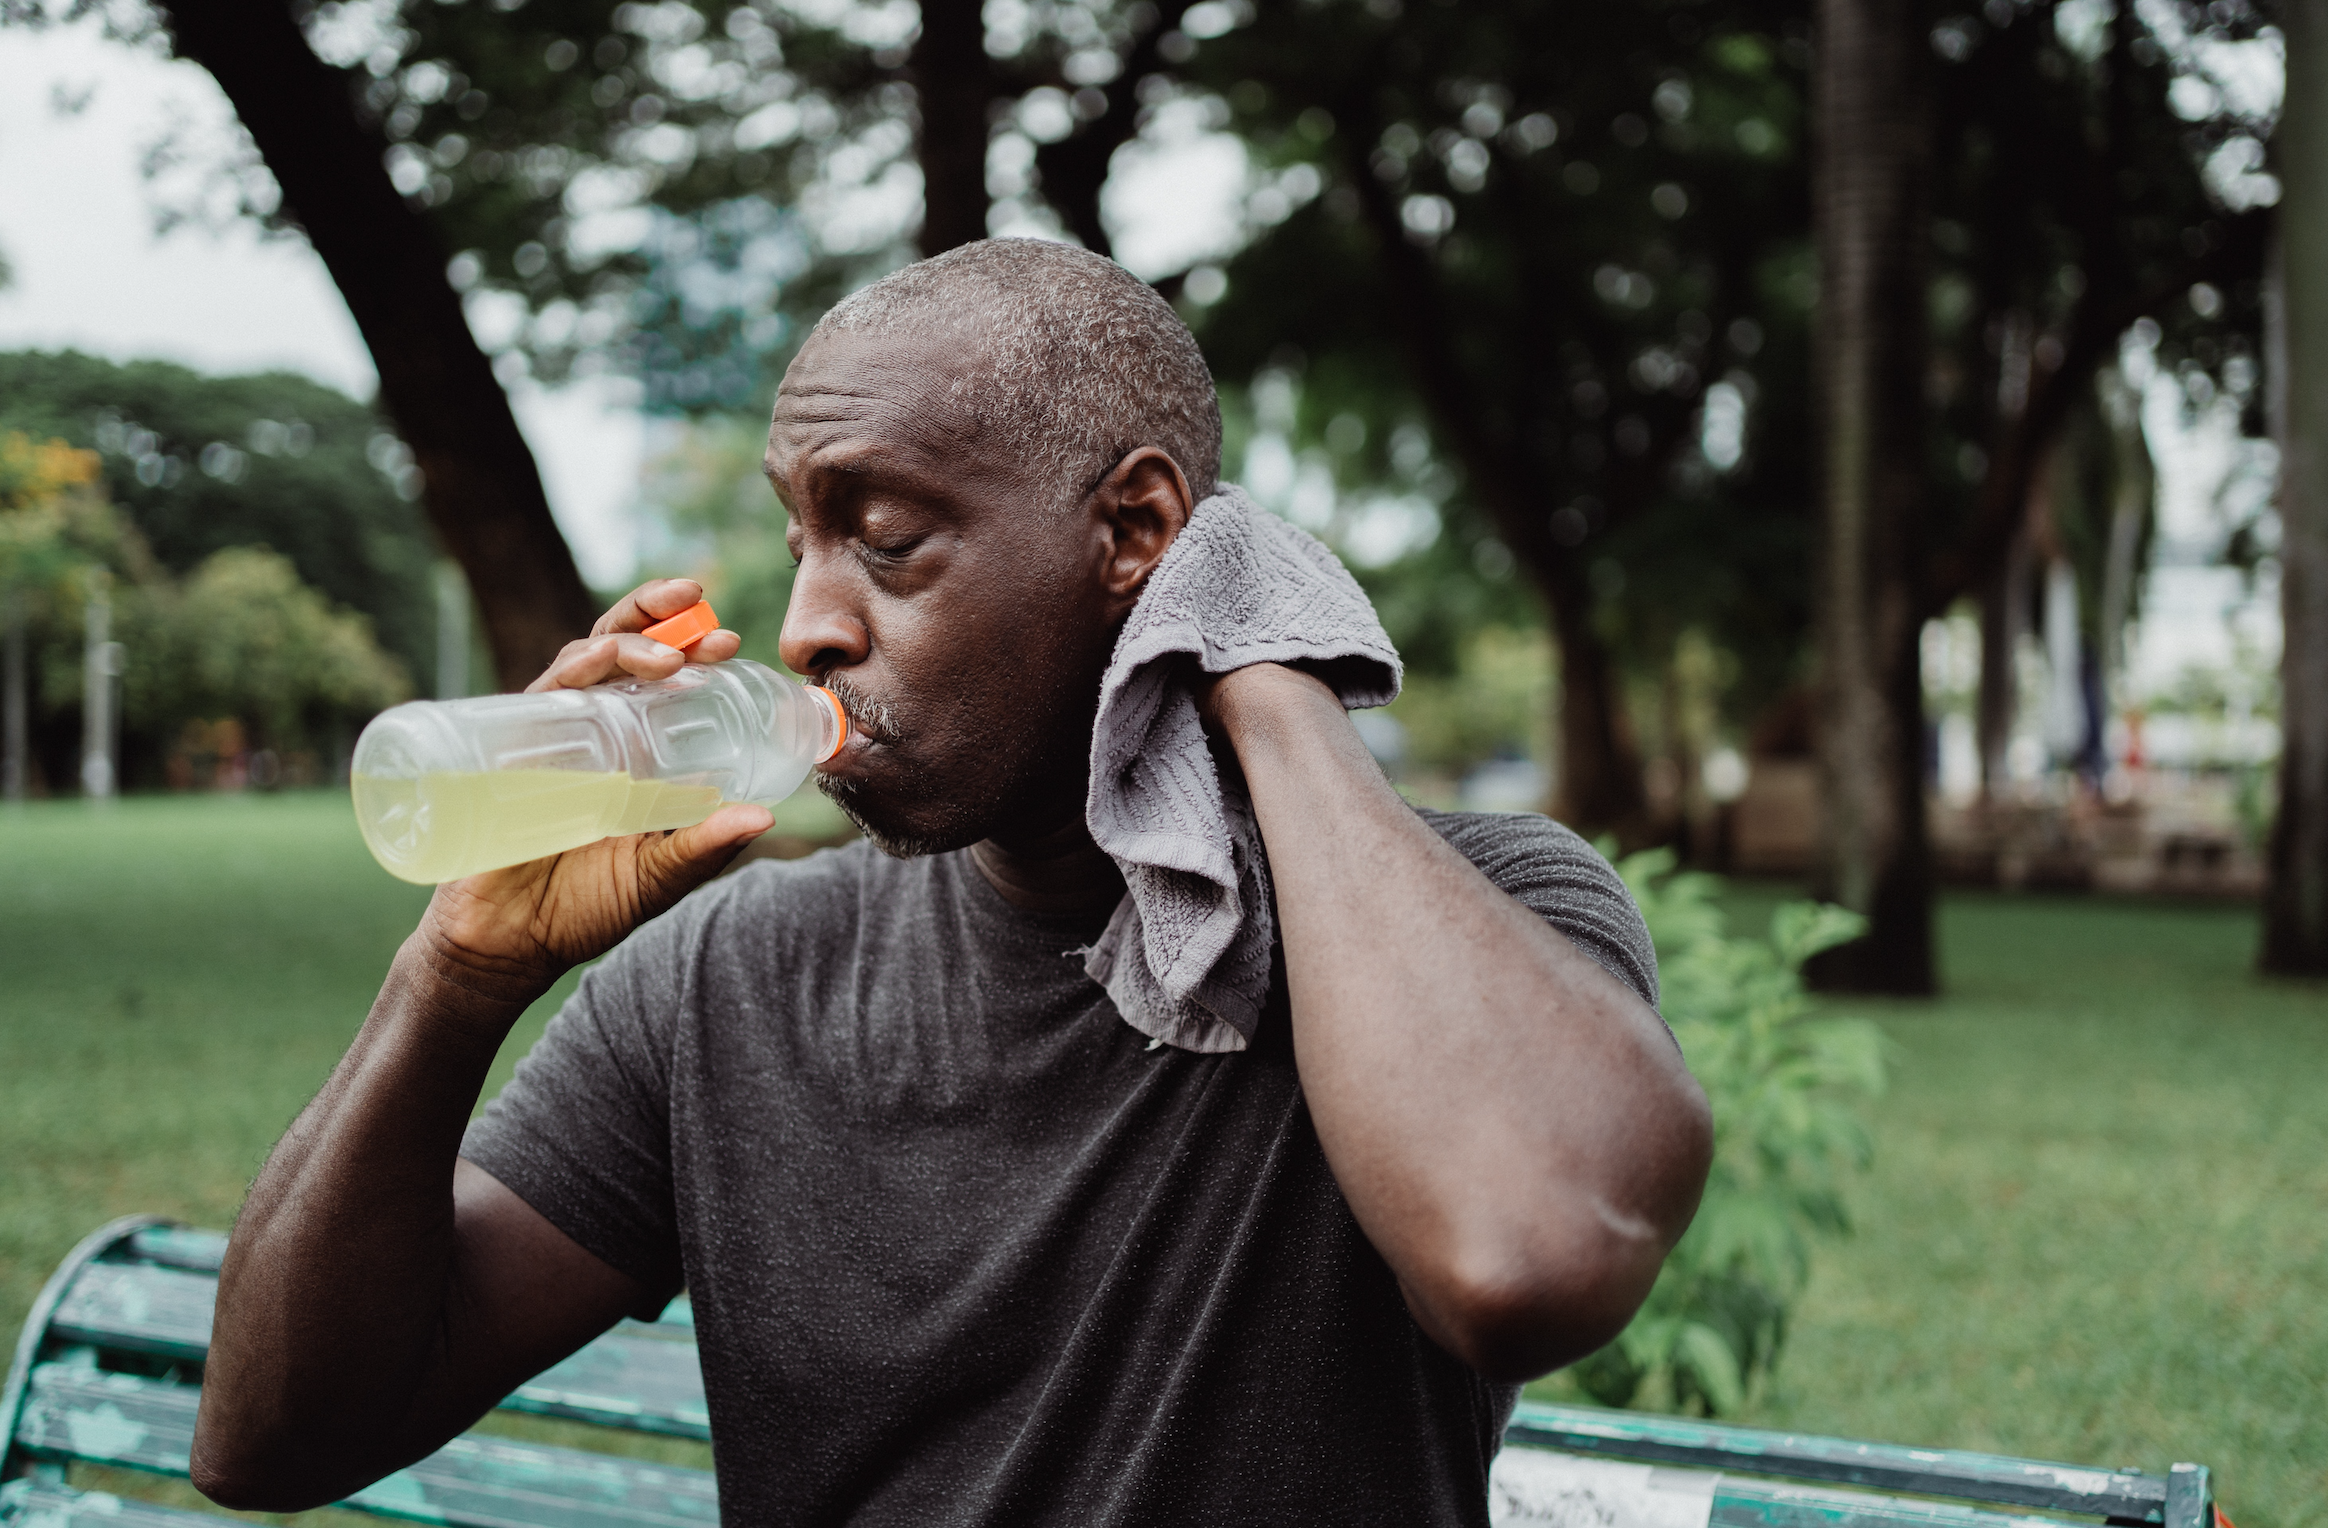 A man wipes sweat from his neck while sipping a sports drink.